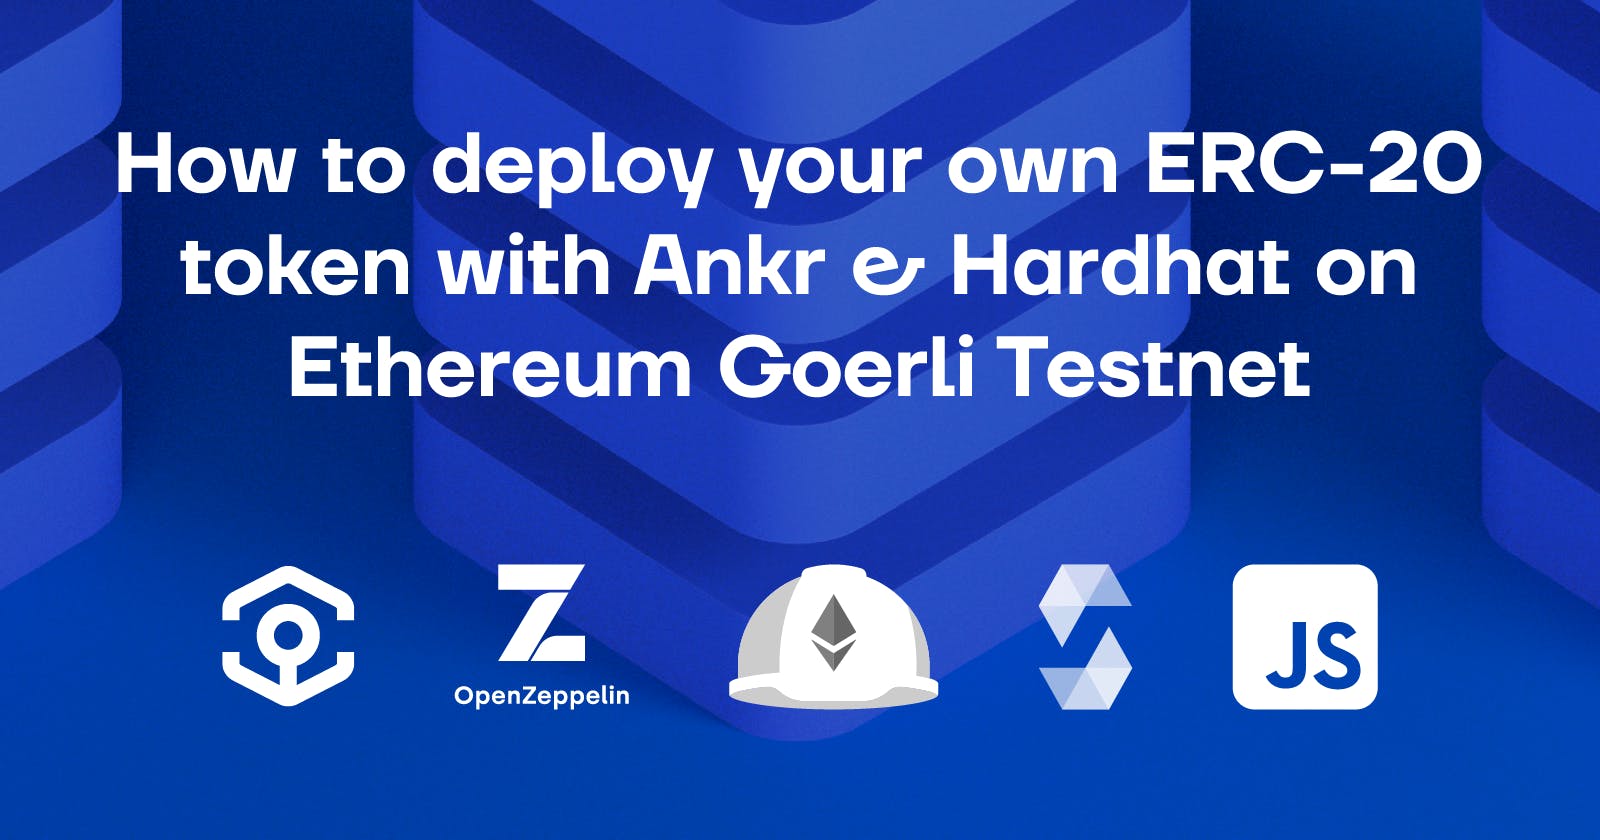 How to deploy your own ERC-20 token with Ankr & Hardhat on ETH Goerli Testnet